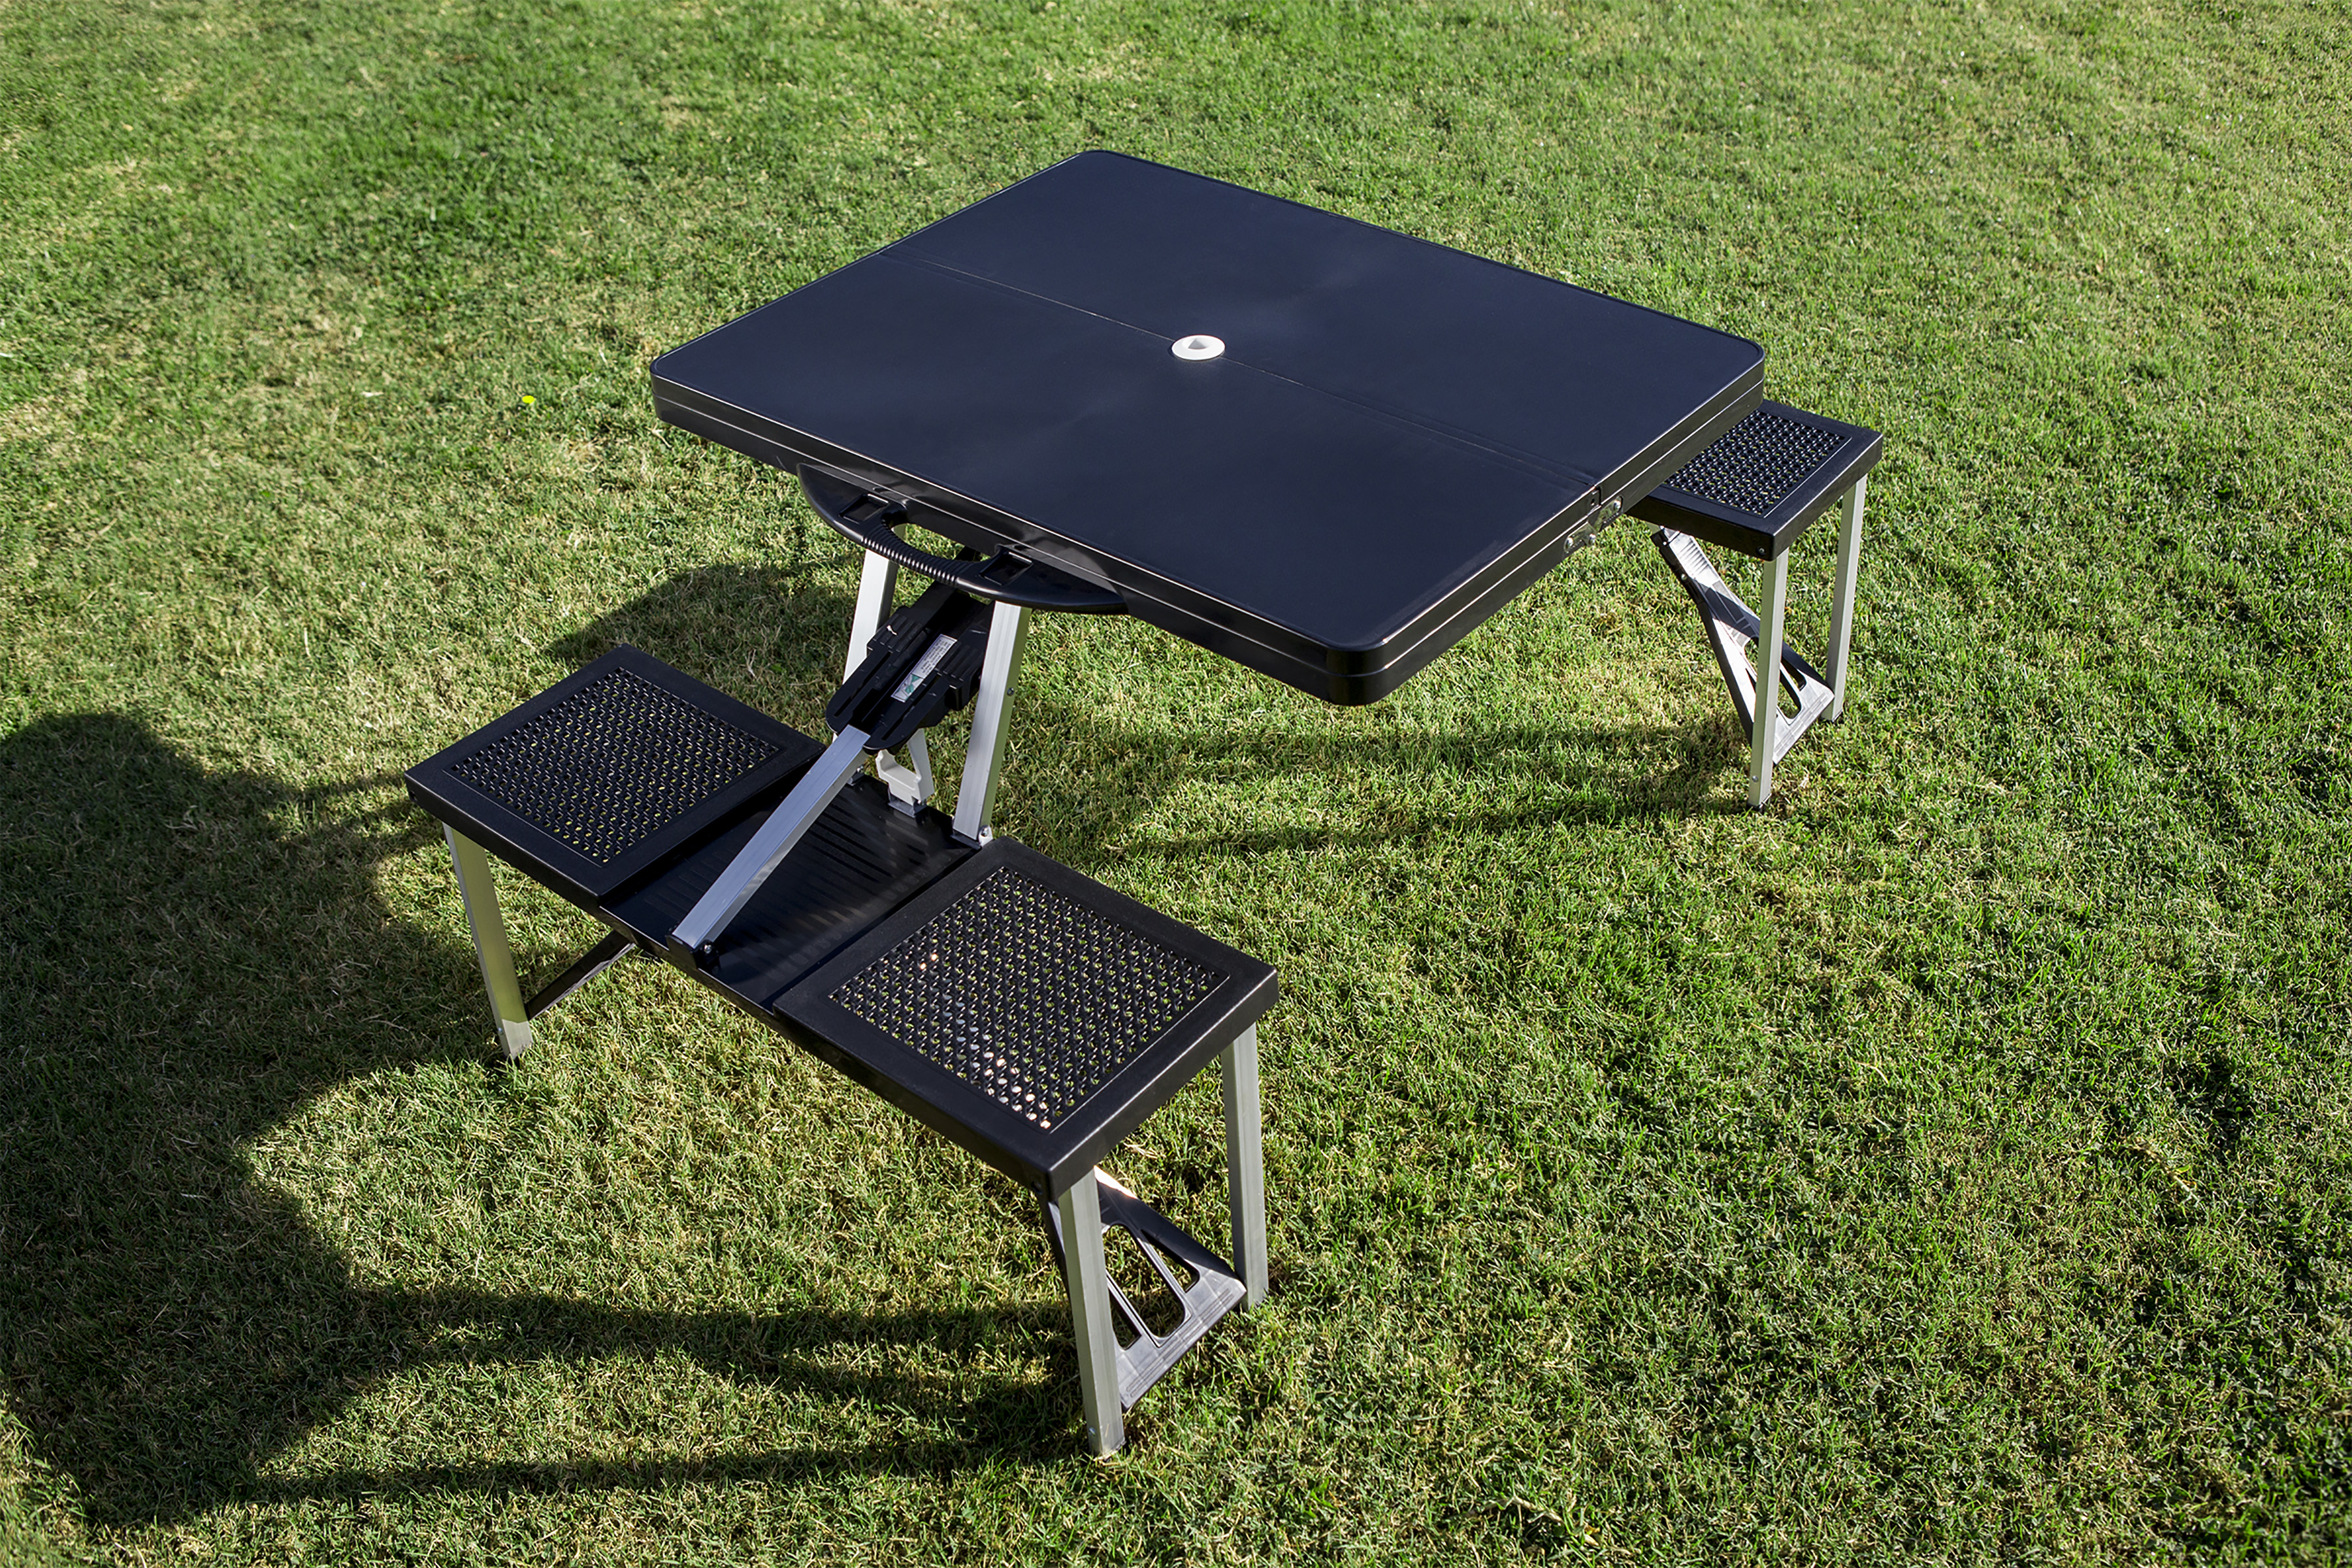 Football Field - Pittsburgh Panthers - Picnic Table Portable Folding Table with Seats